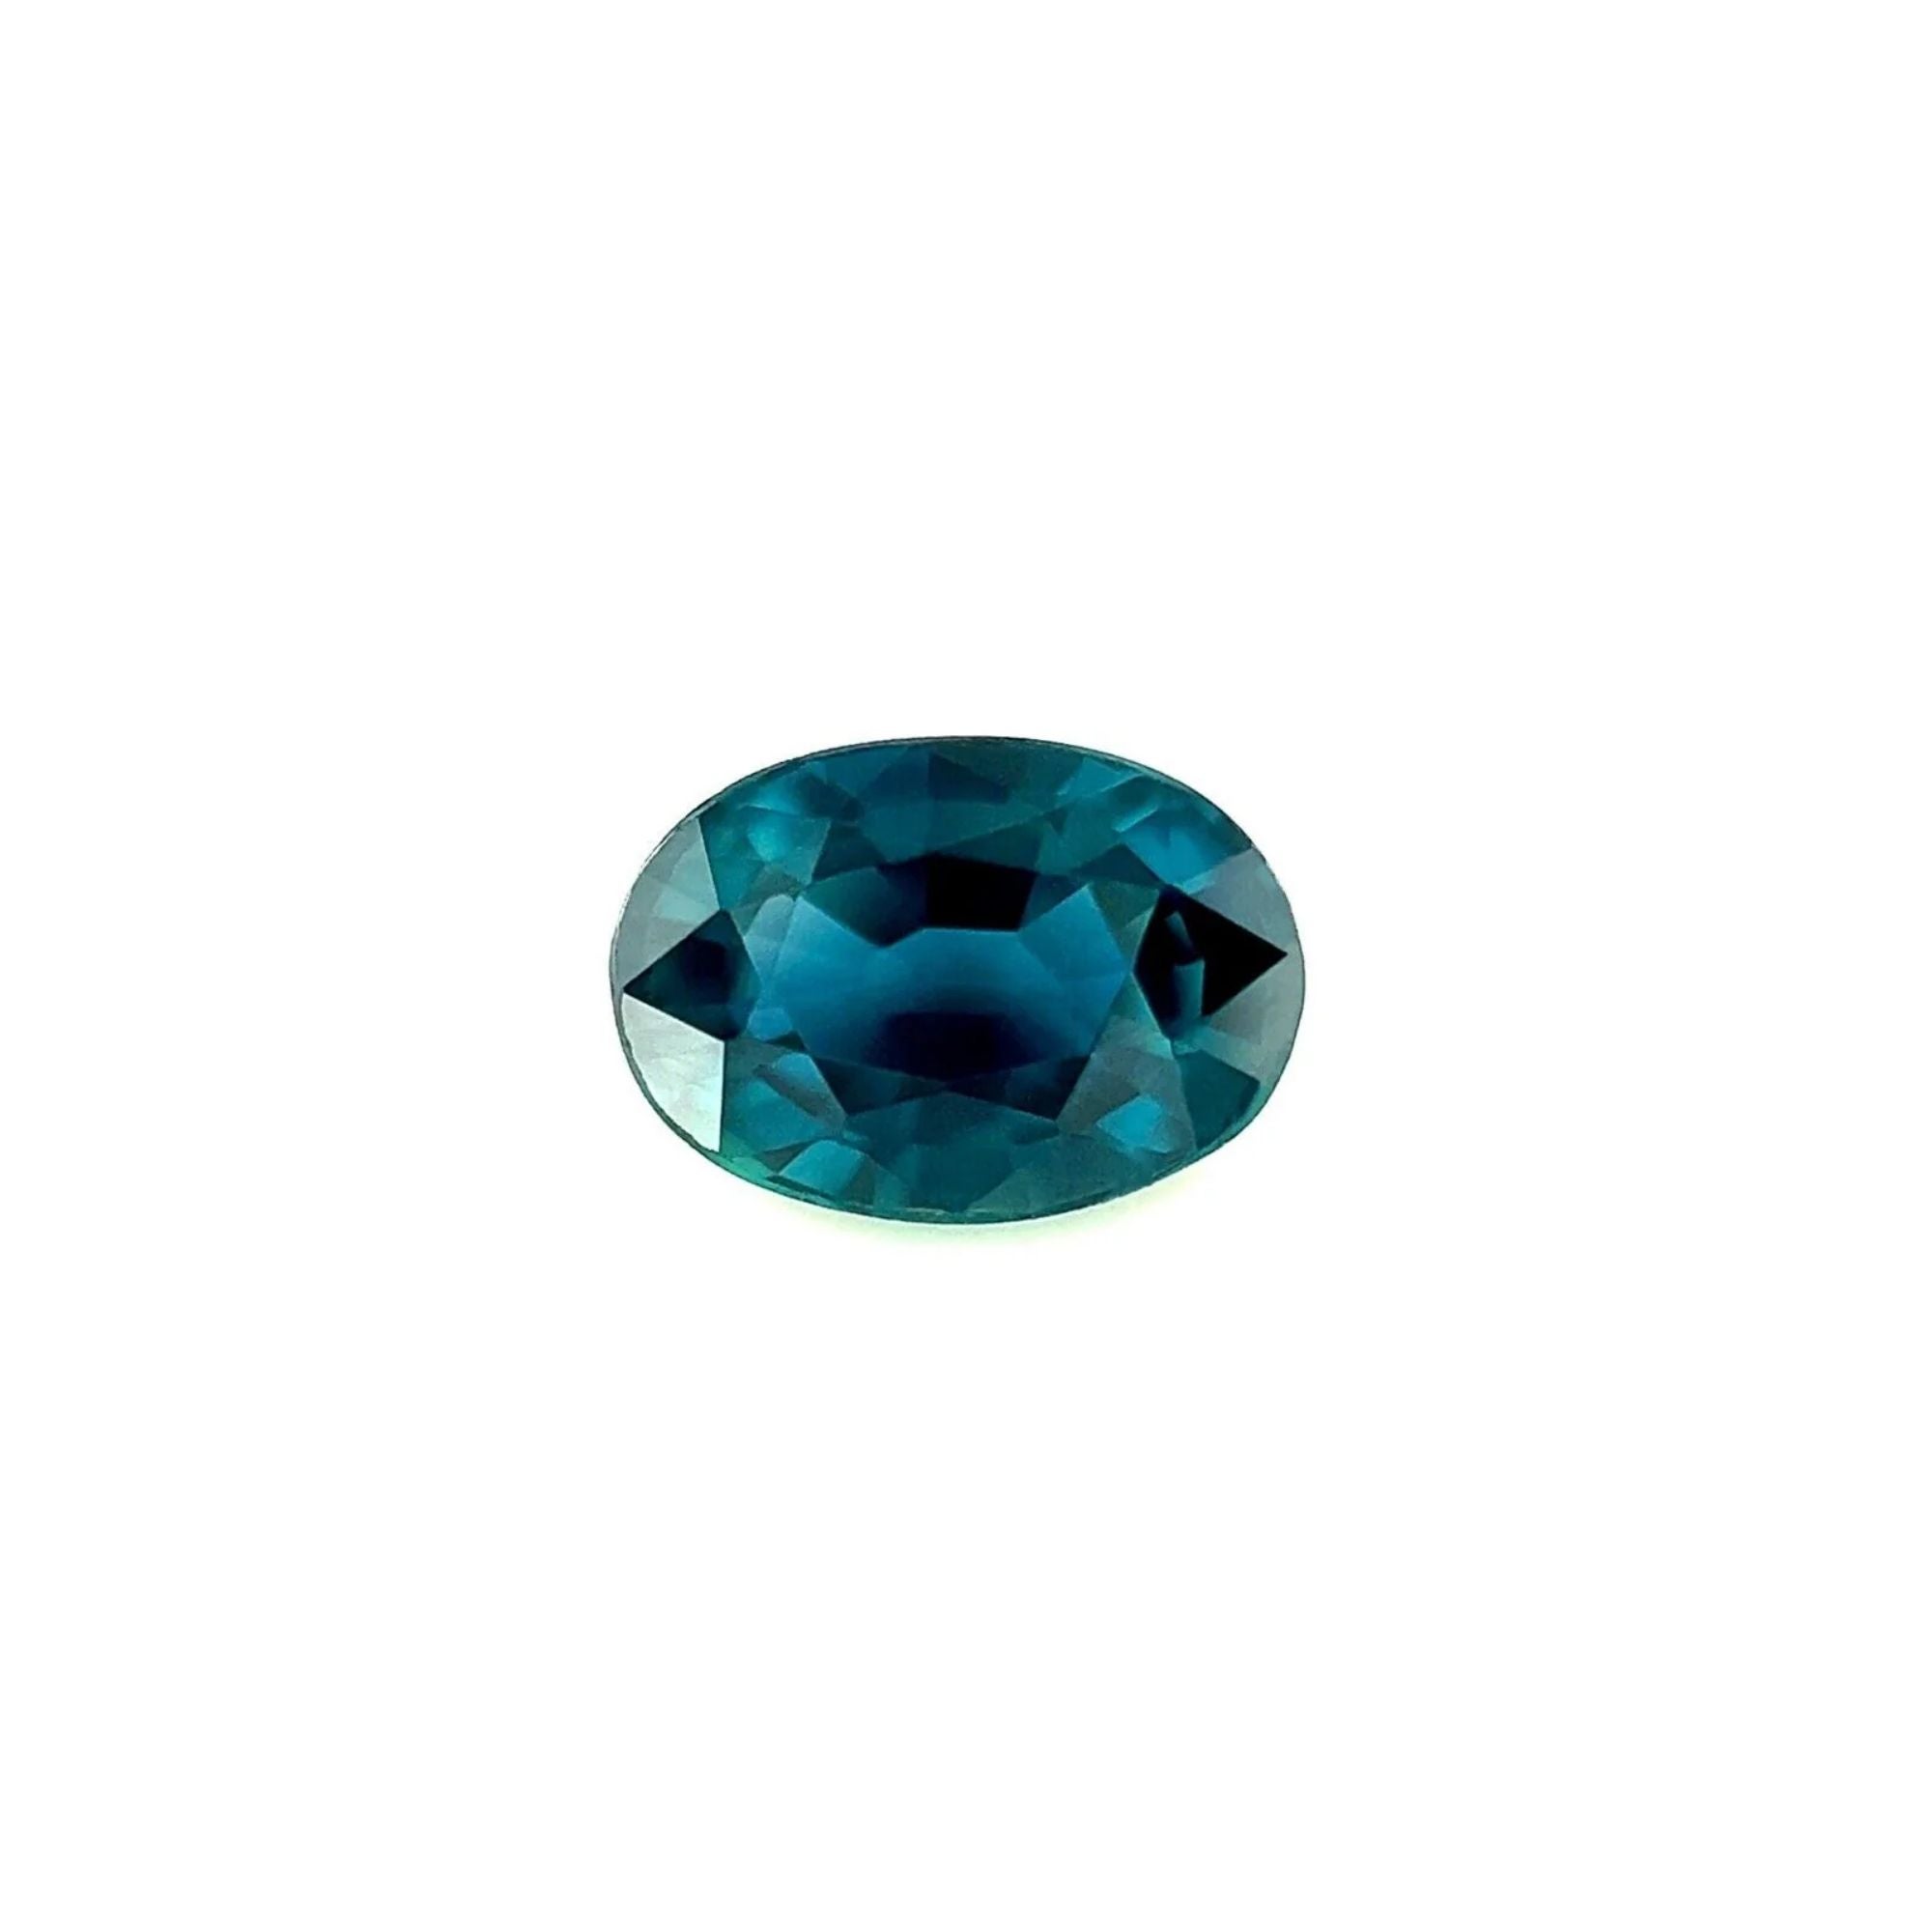 1.14ct Rare Sapphire GIA Certified Fine Deep Blue Untreated Oval Cut Gemstone For Sale